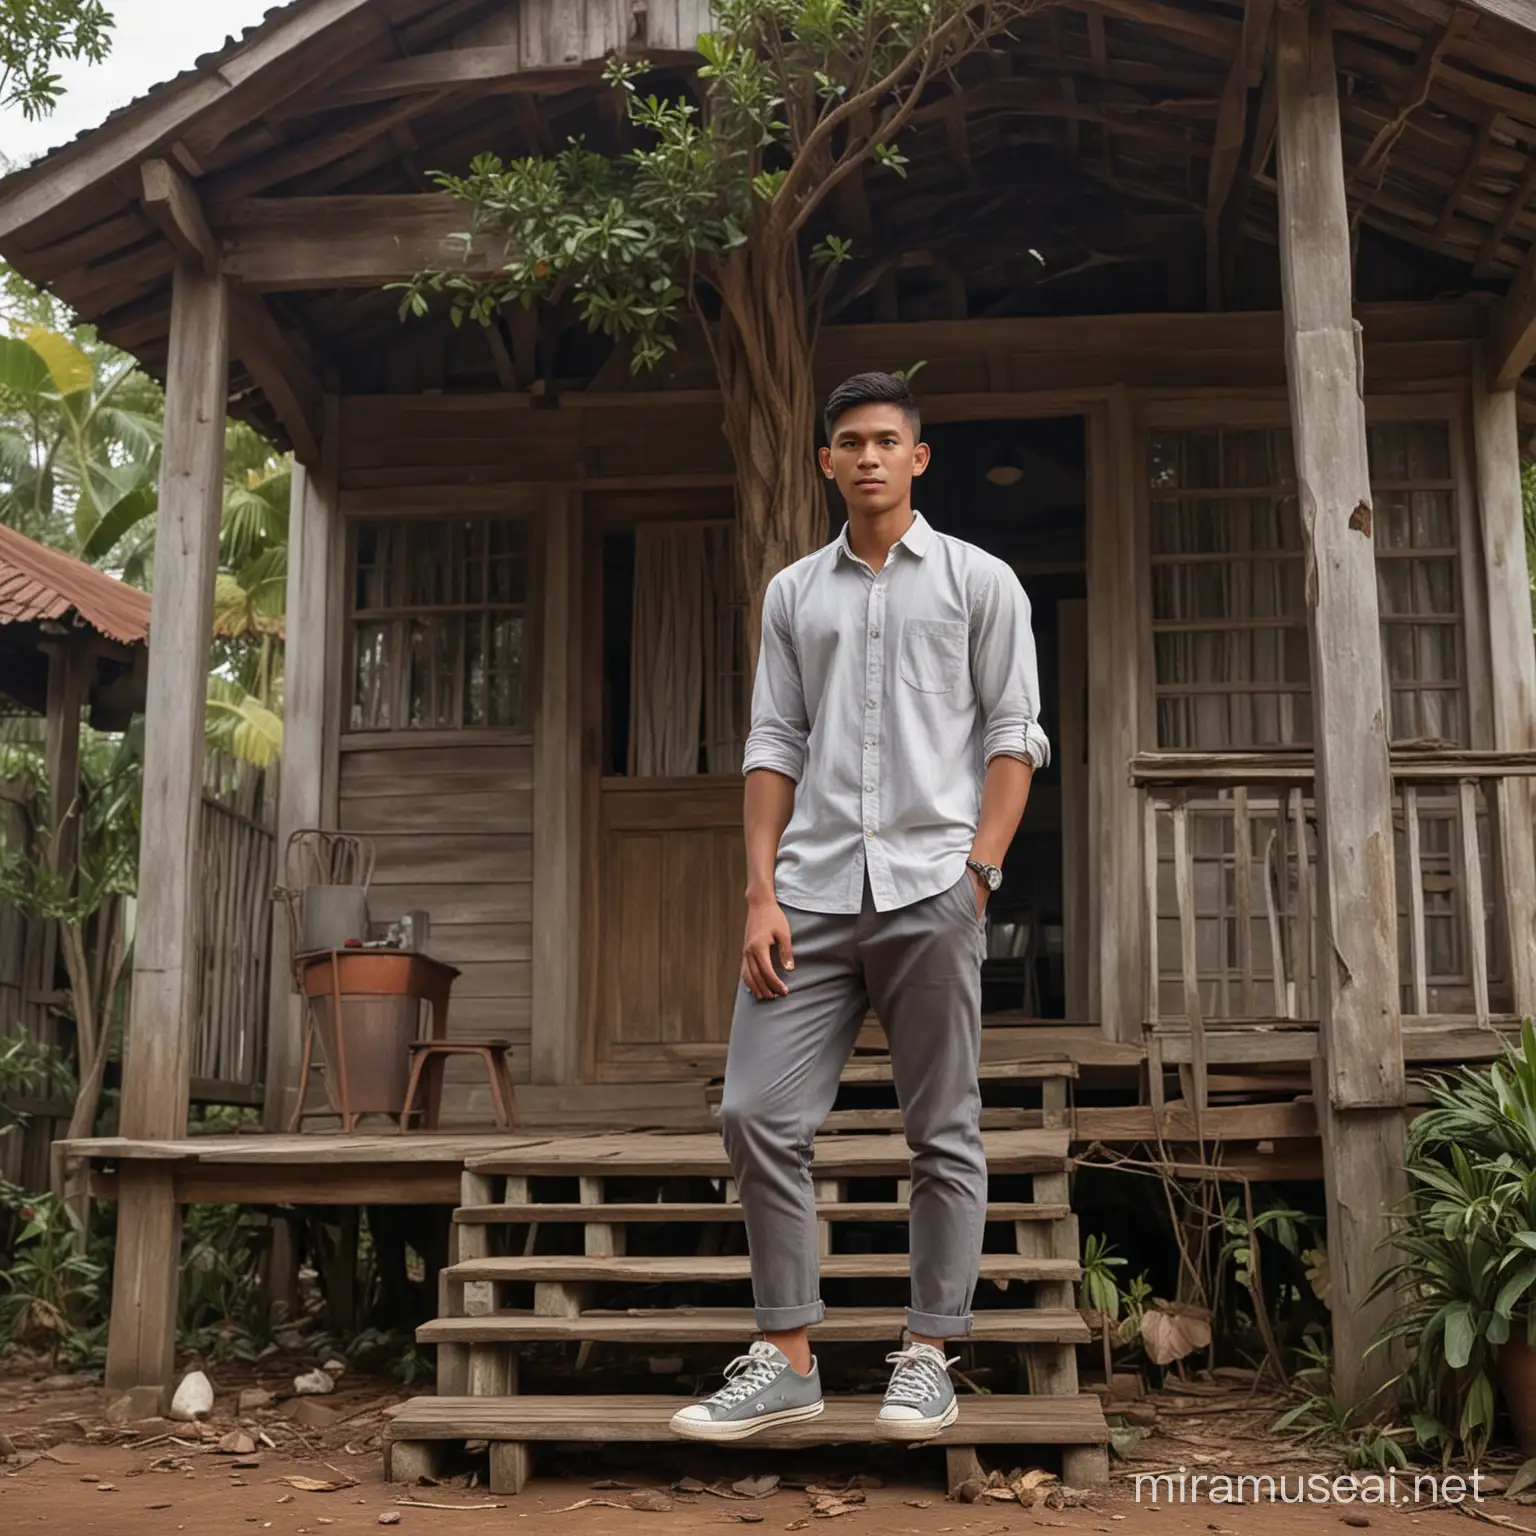 An Indonesian handsome young man wearing neat shirt and grey trousers, converse shoes, is standing in the front yard of an old wooden house with a porch connected to stairs, rusty zinc roof, with a Malay village atmosphere, there is a large banyan tree, there is a trophy on the table, realistic, detailed, cinematic, focused shot.